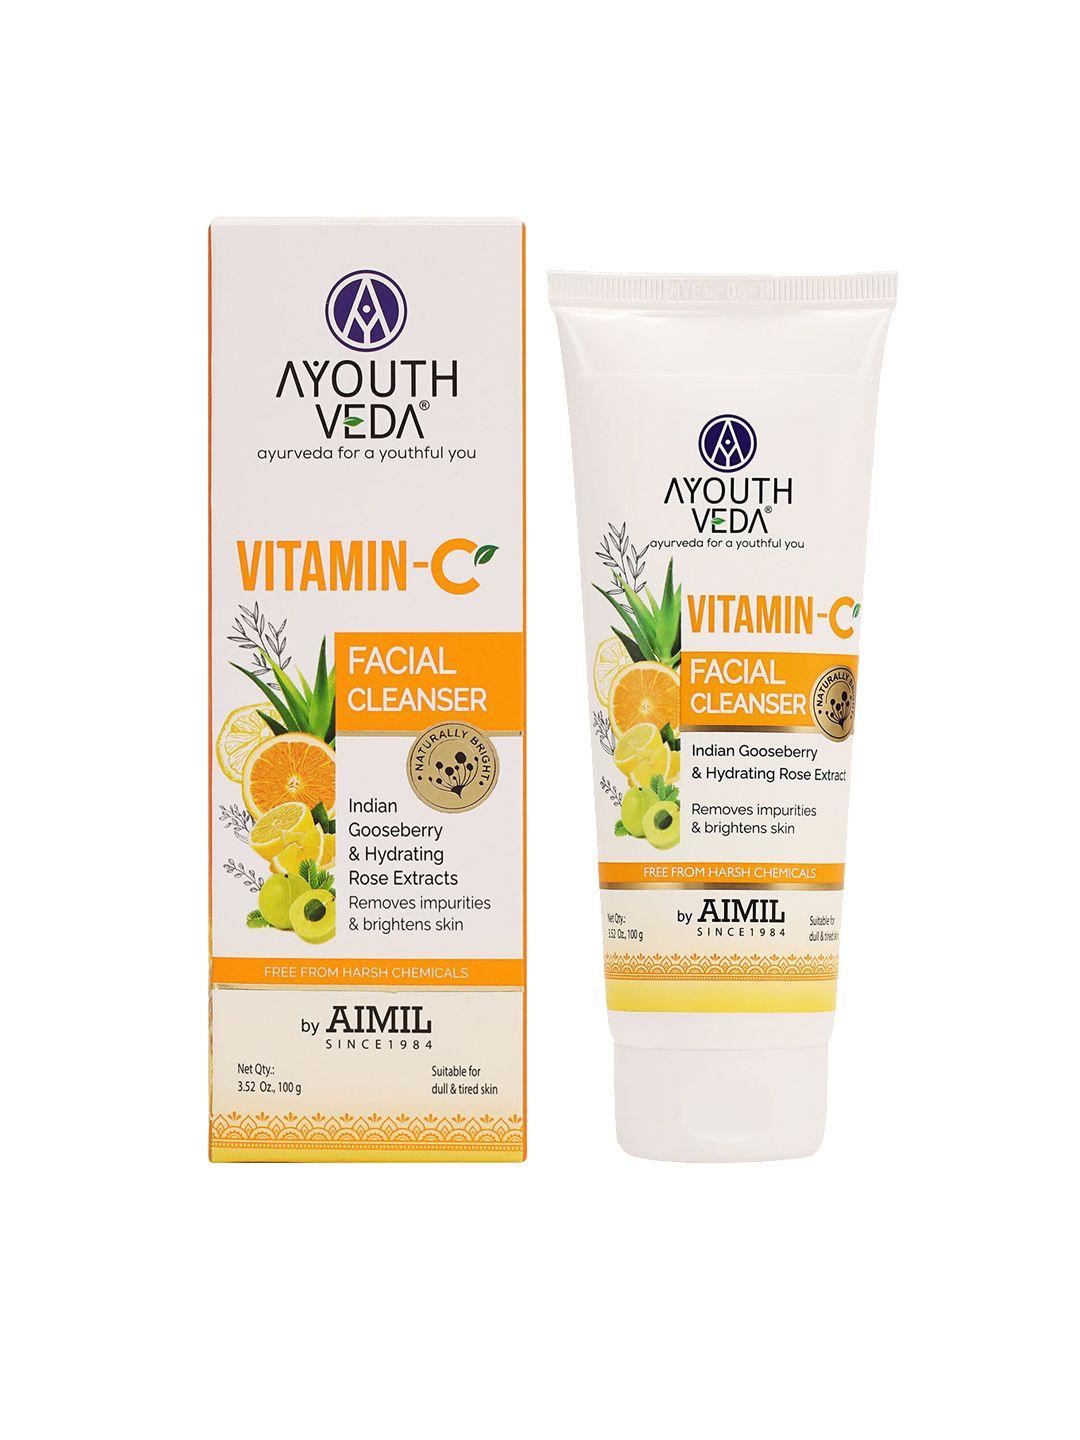 ayouthveda vitamin c facial cleanser with indian gooseberry & rose extracts - 100g